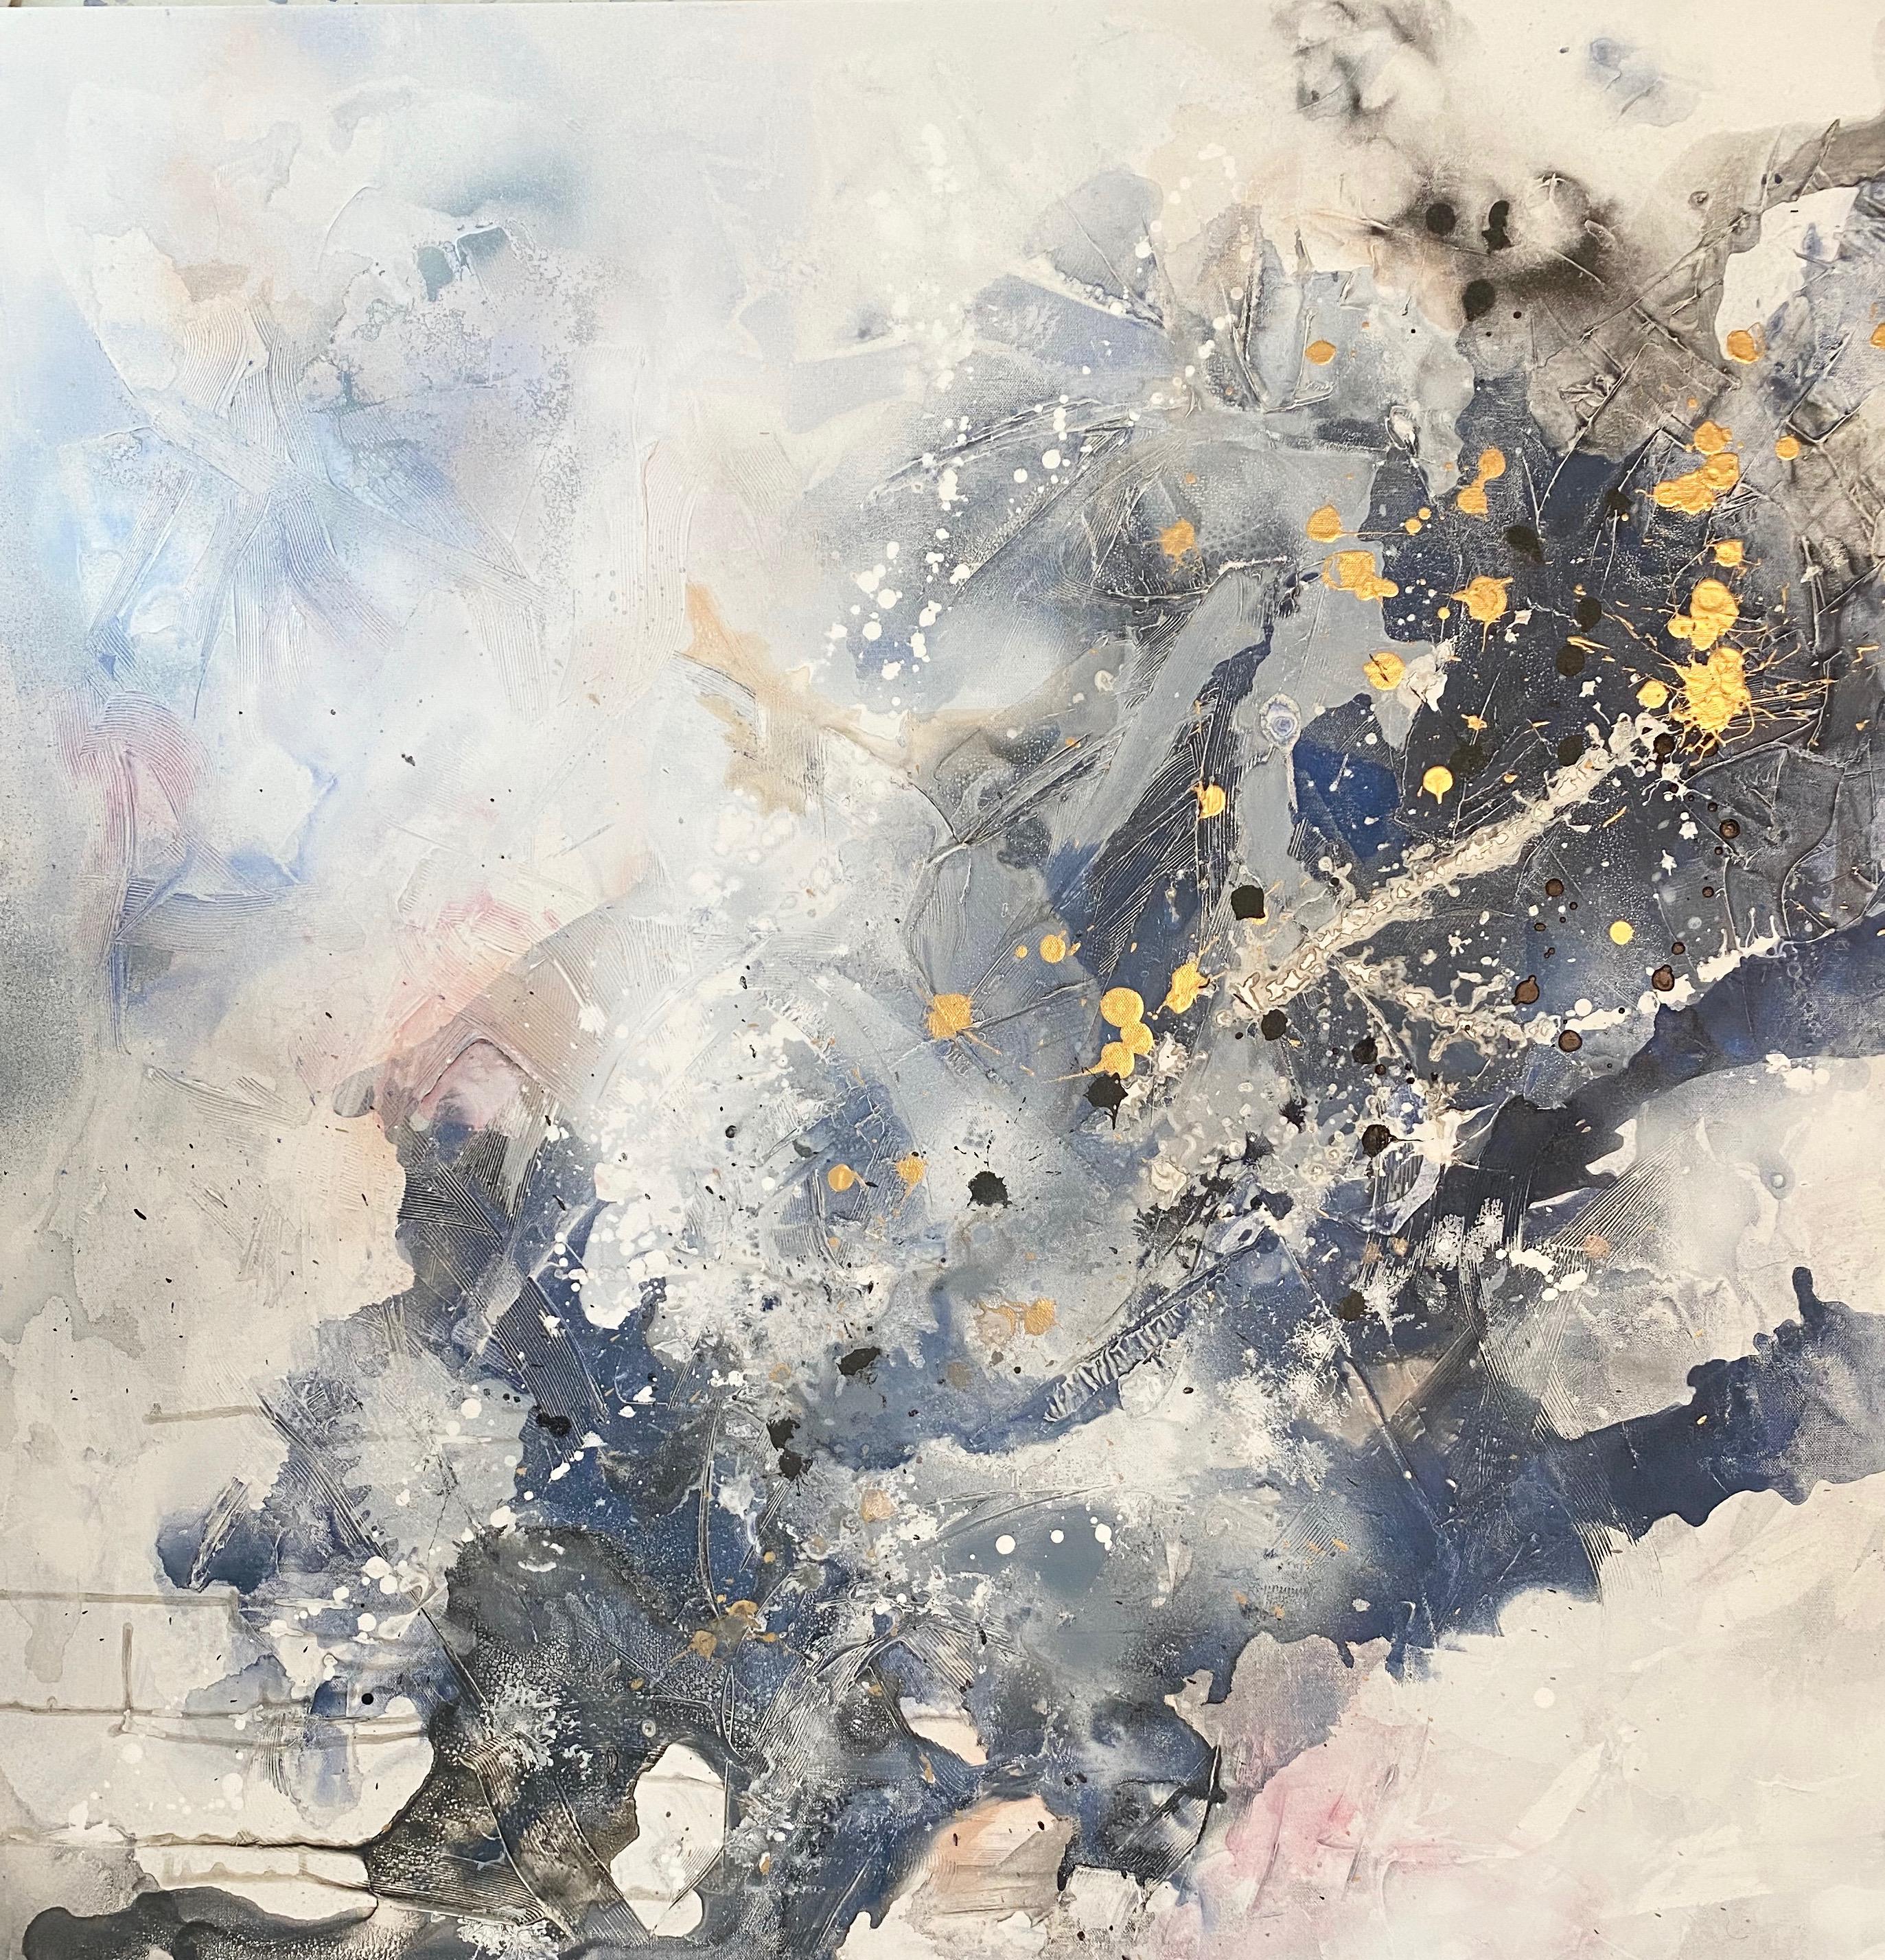 Cotton Candy Sherbert I is an abstract mixed media painting on canvas. Using her signature mix of airy colors contrasted by bold accents, Artist Annie Mandelkern expertly layers all together to create this stunningly textural piece. 

Cotton Candy